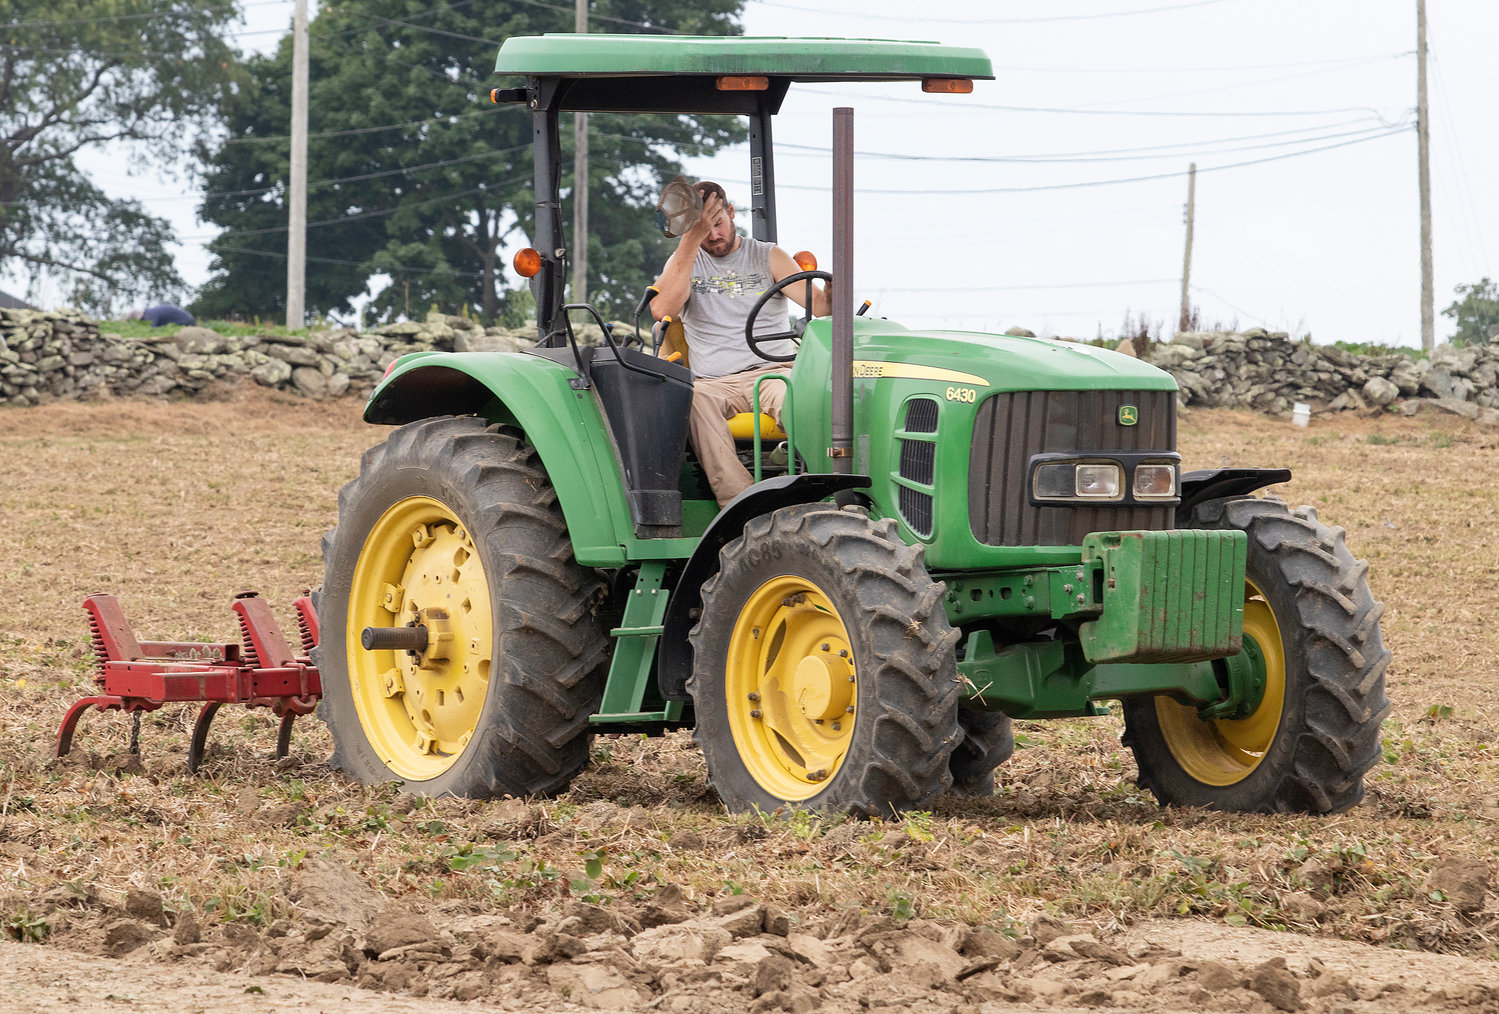 Mike Flynn of Quonset View Farm on Middle Road wipes his brow last Friday as he rotates the strawberry field’s soil in preparation for next season. The farm has been experiencing “severe drought conditions” and irrigating is expensive, Flynn said.